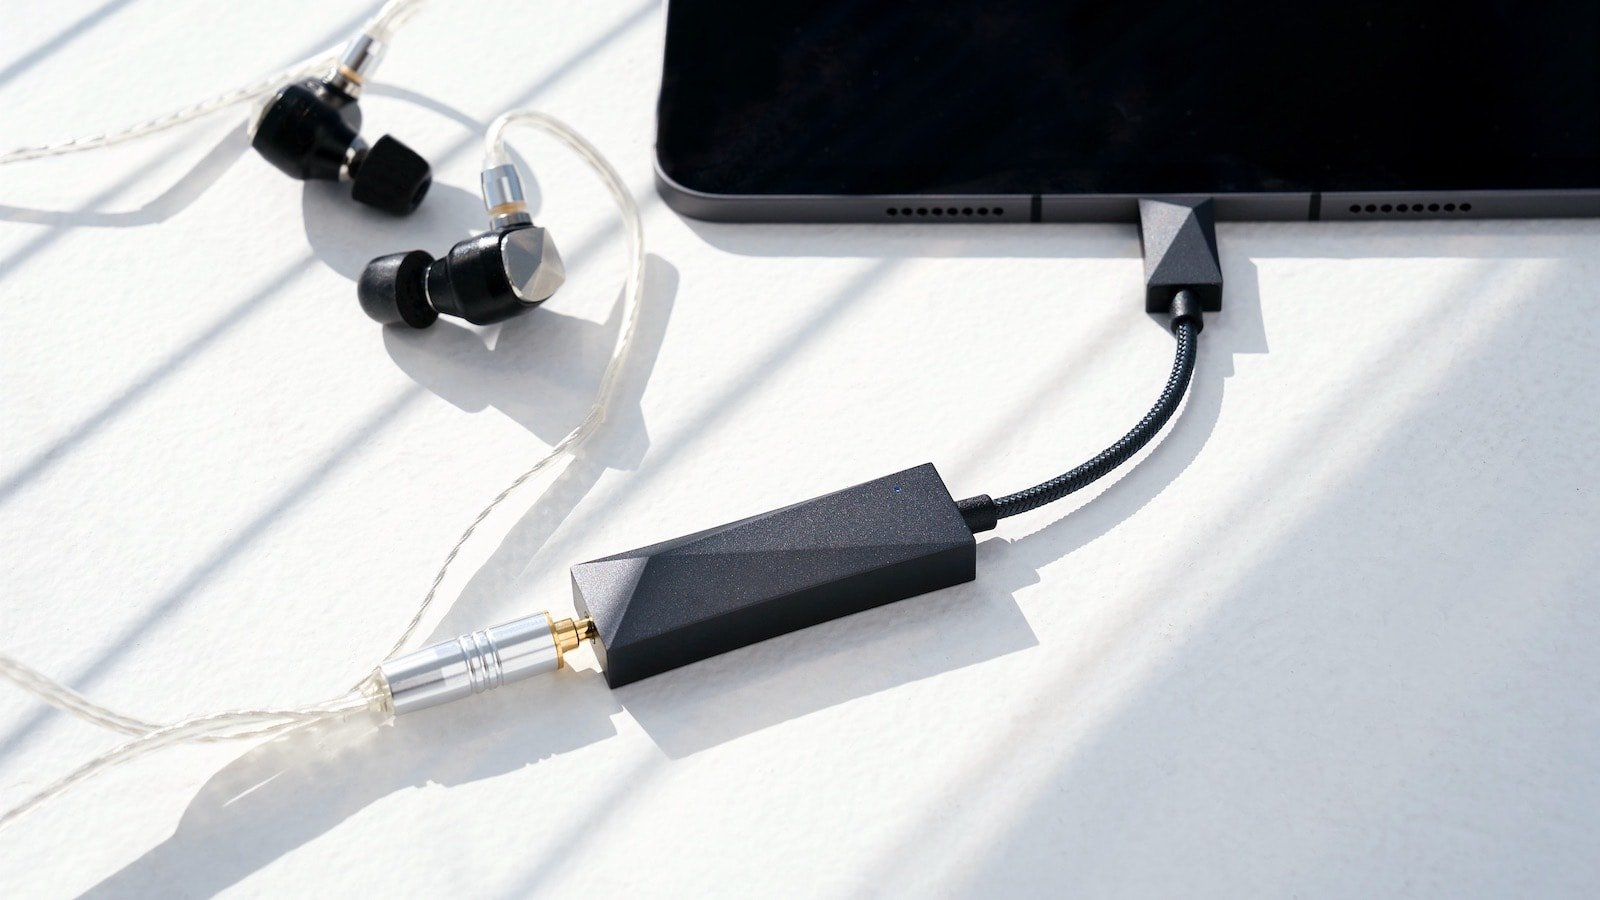 Astell&Kern AK HC3 hi-fi USB DAC cable has a microphone input with voice features